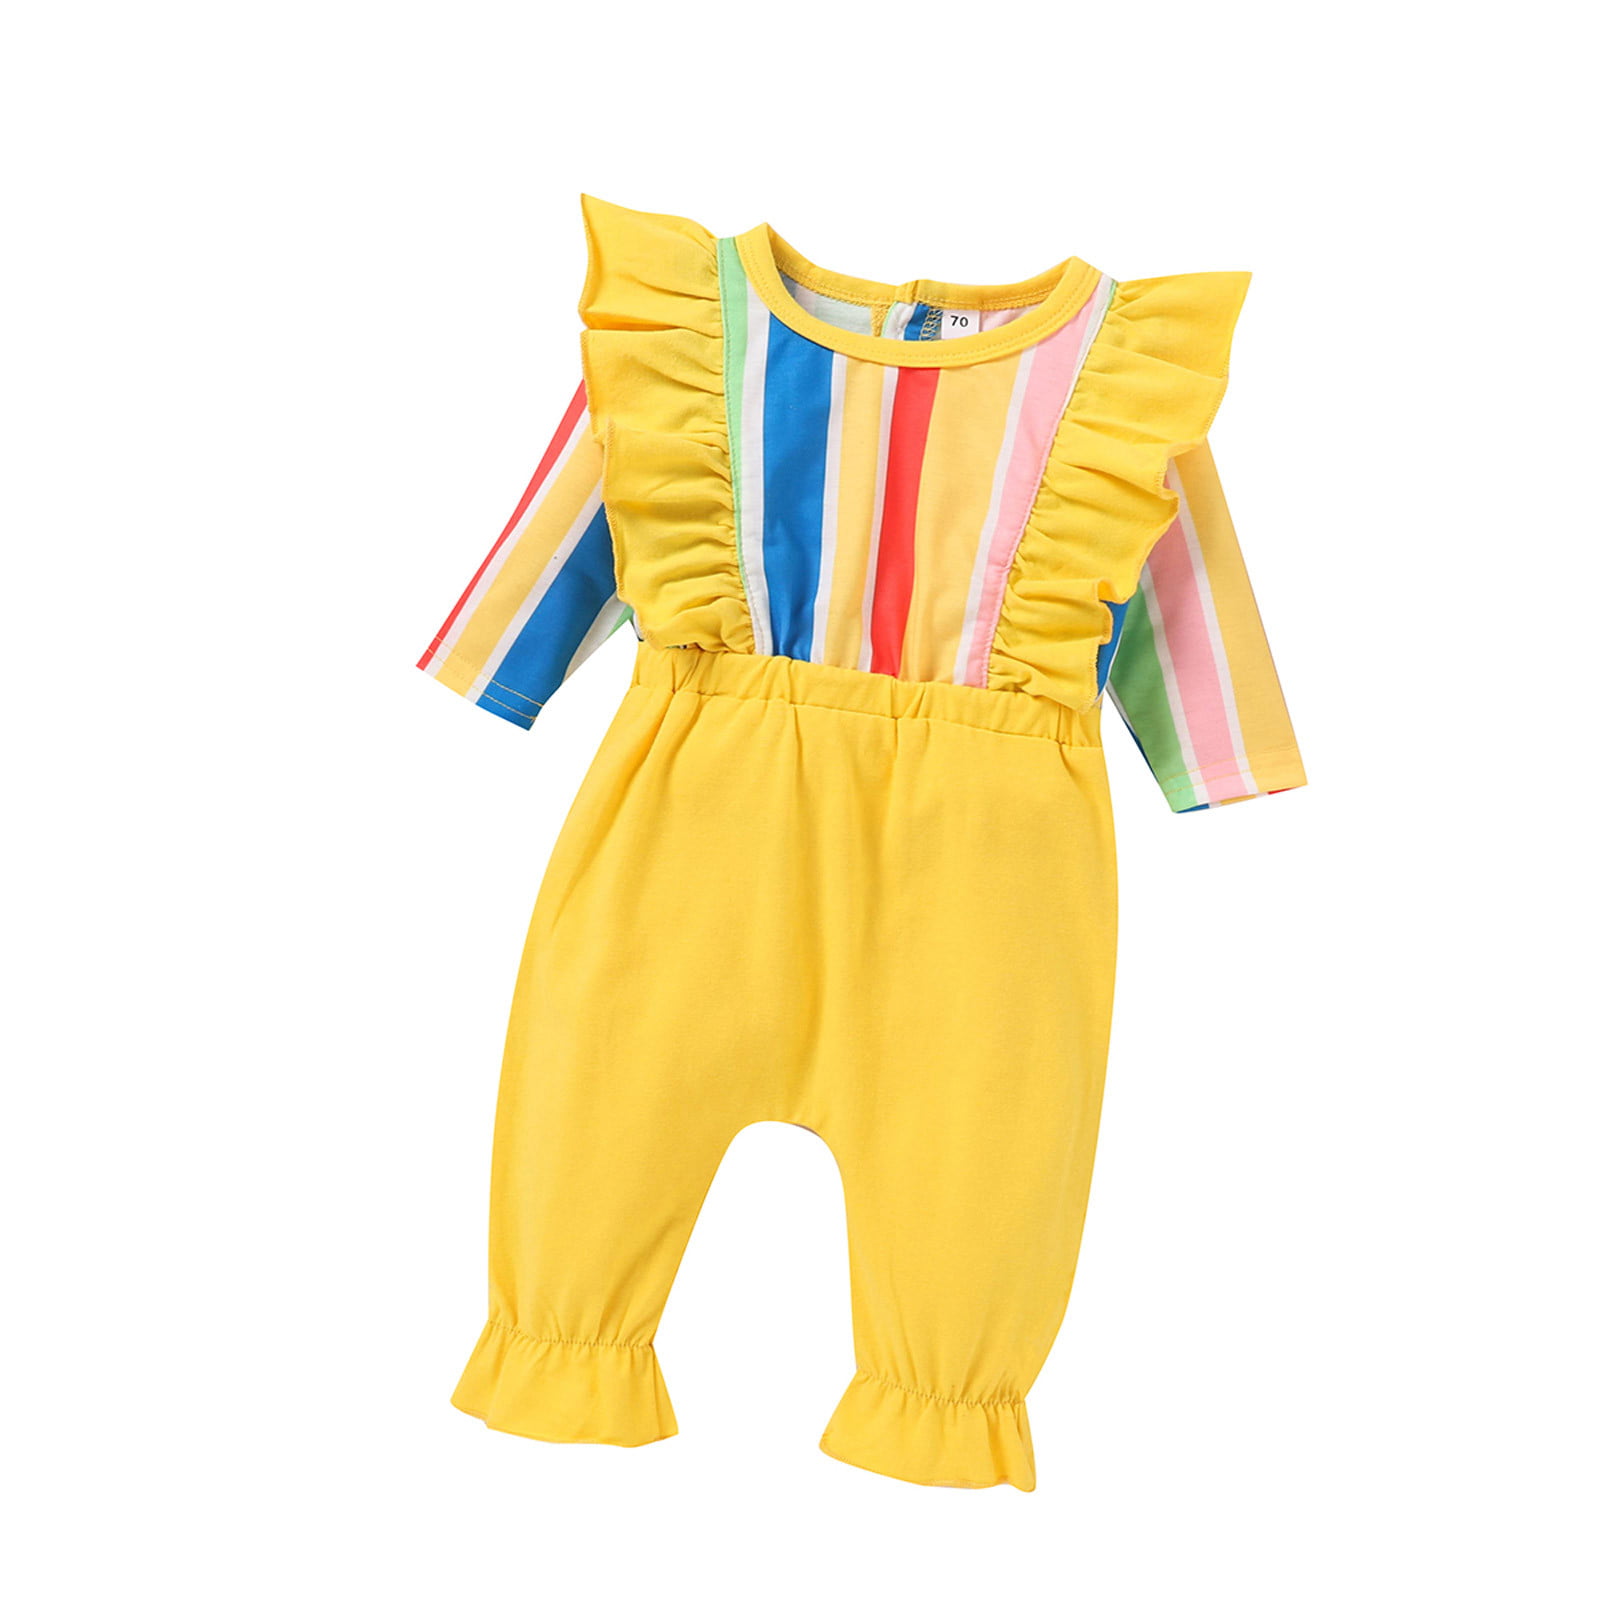 Infant Girls Baby Winter Rainbow Printed Patchwork Jumpsuit Romper ...